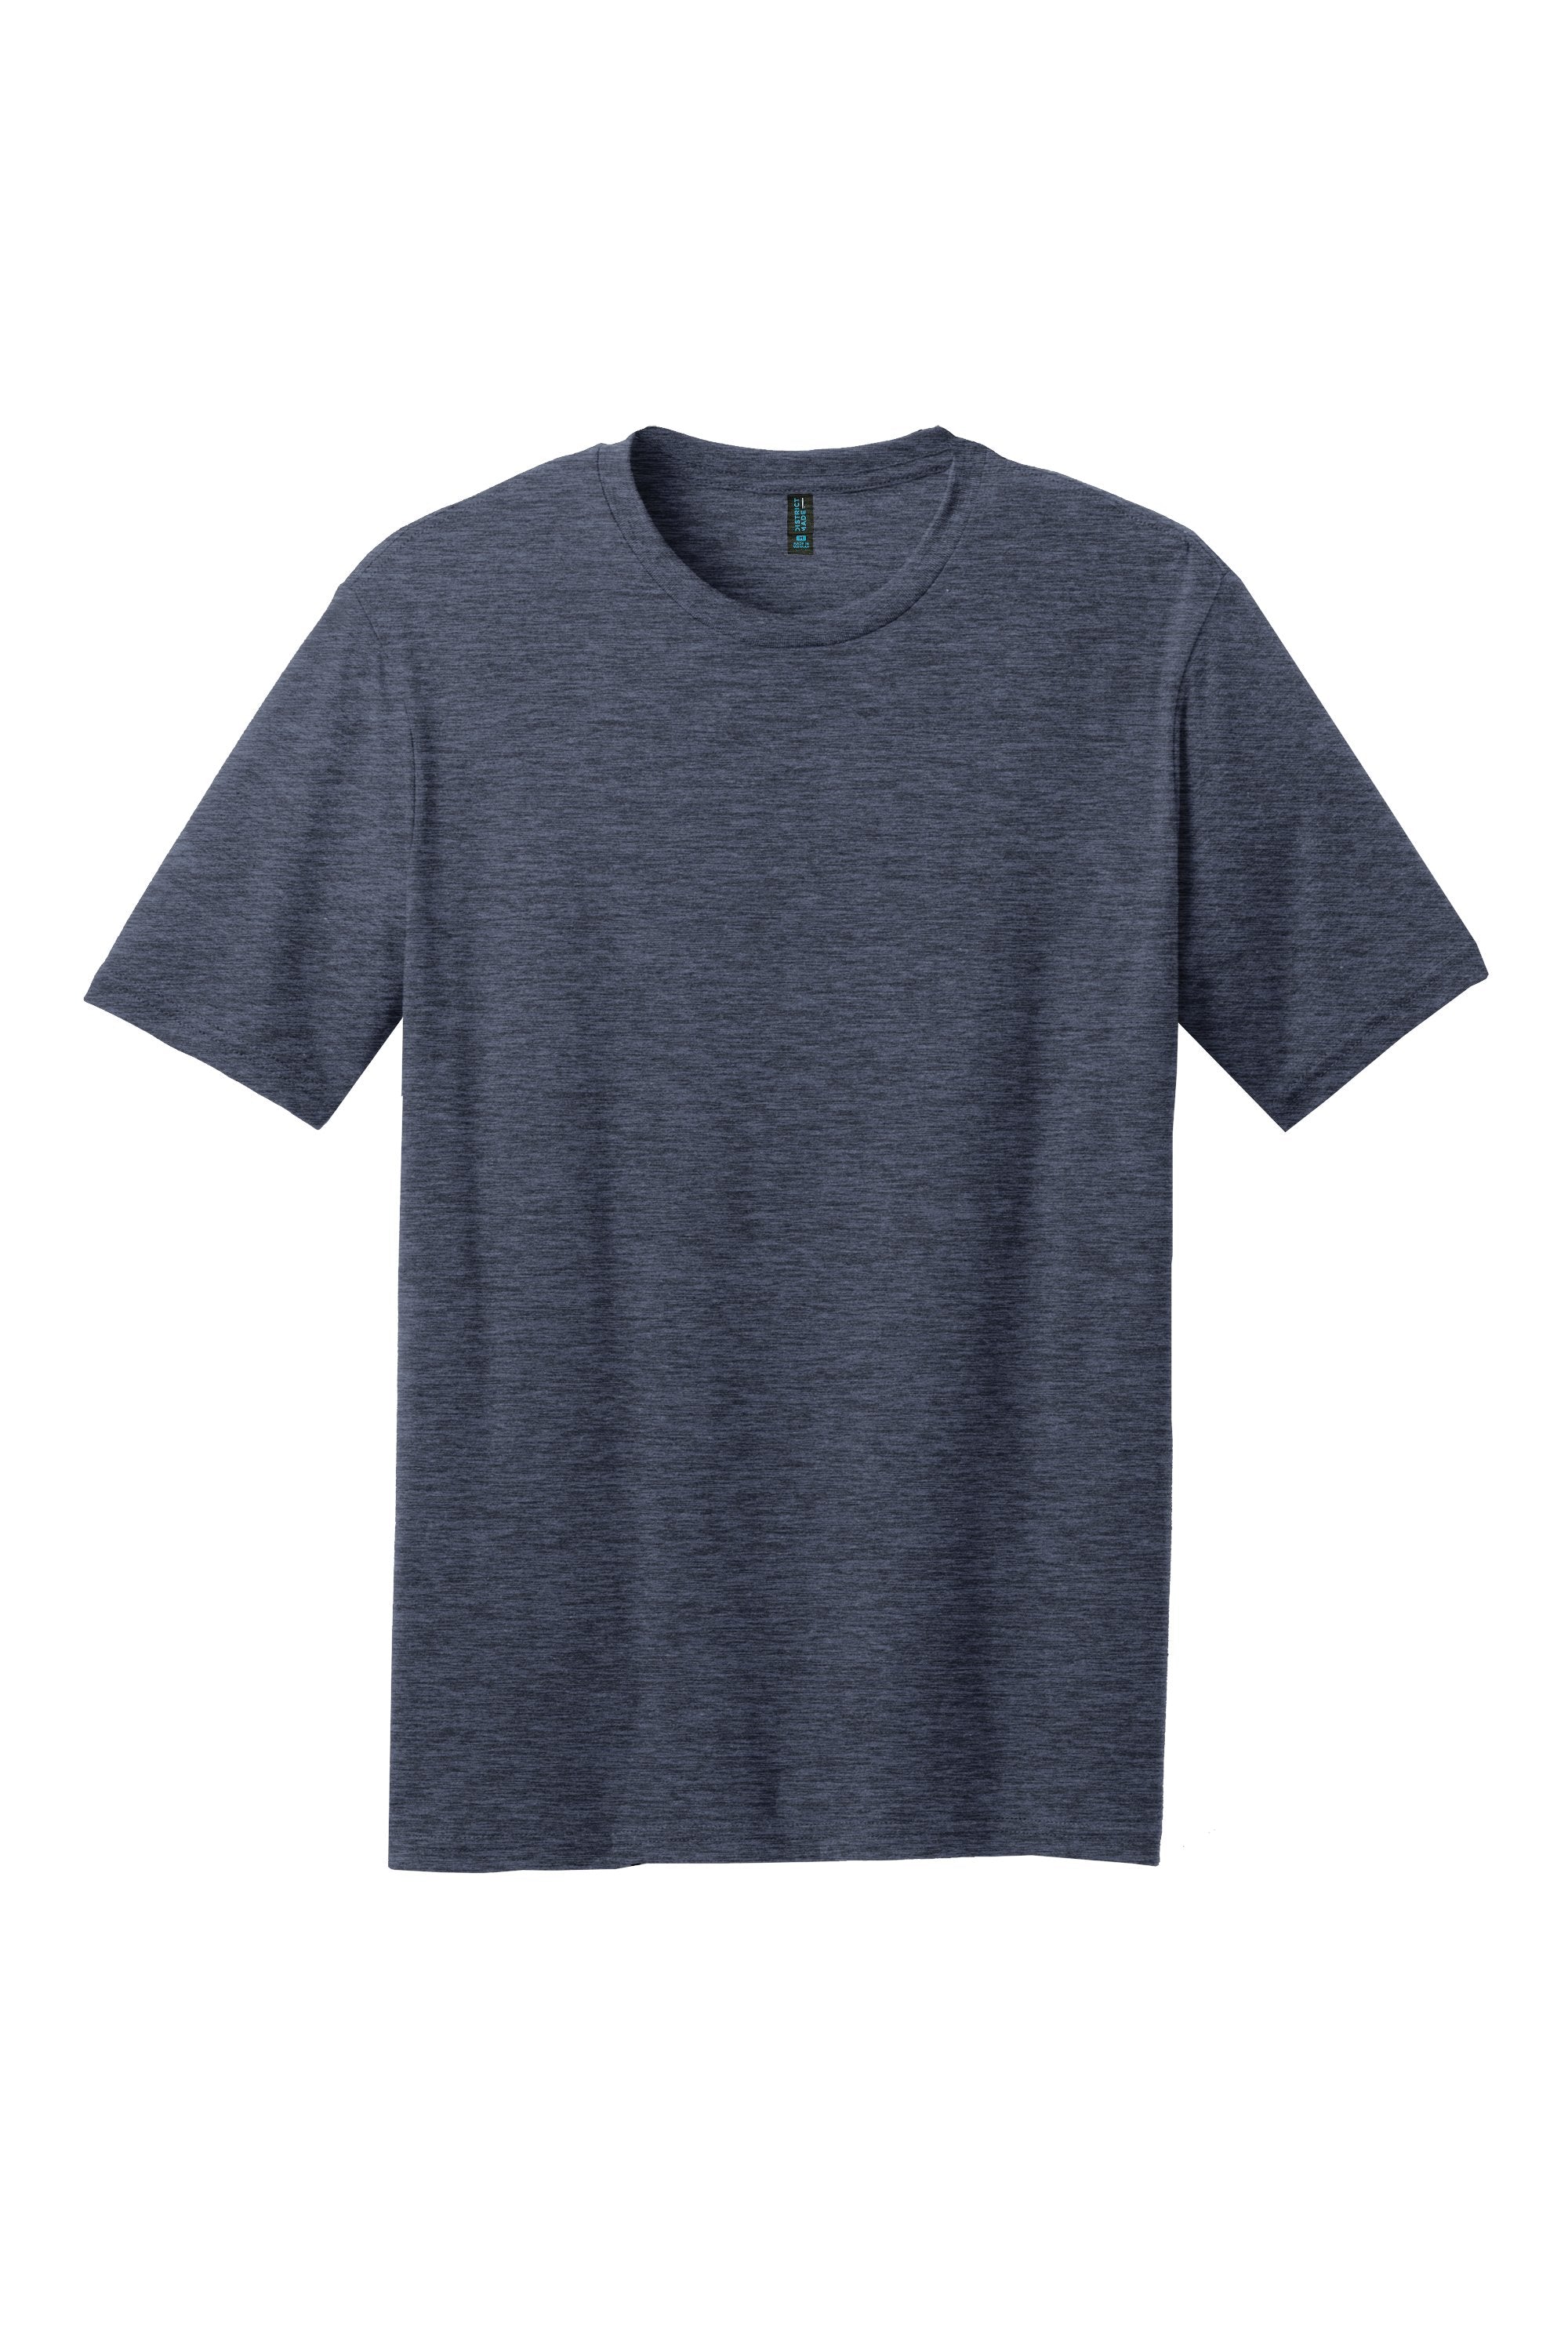 Perfect Blend Tee Mens